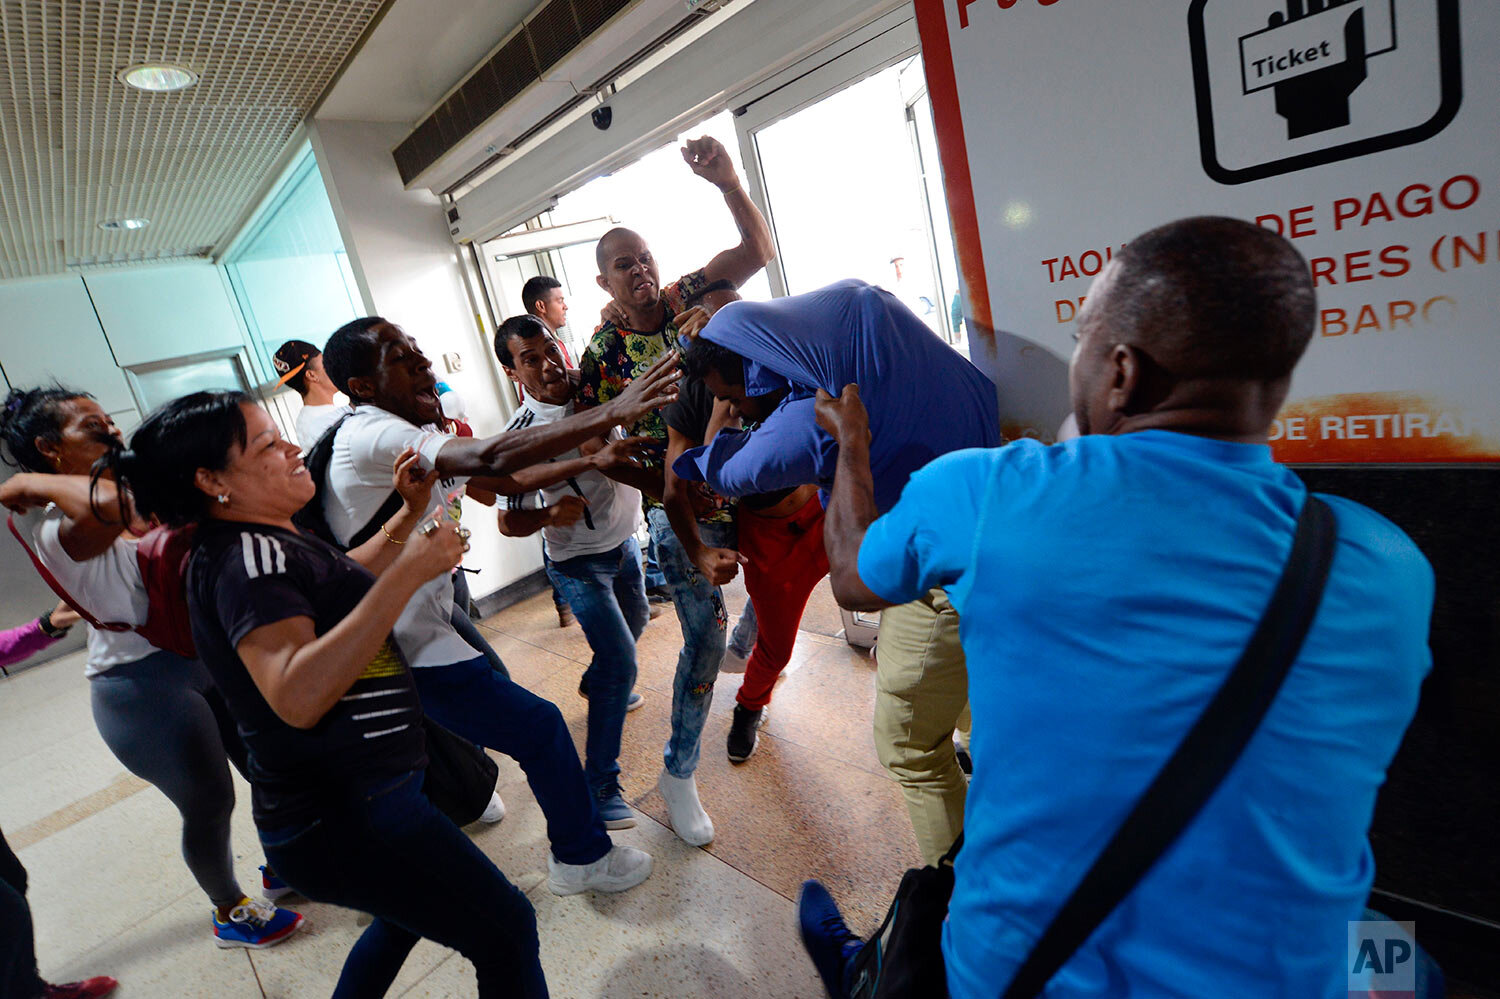  Government supporters, left and front, fight with a member of the opposition who is awaiting the arrival of opposition leader Juan Guaido at the Simon Bolivar International Airport in La Guaira, Venezuela, Tuesday, Feb. 11, 2020. (AP Photo/Matias De